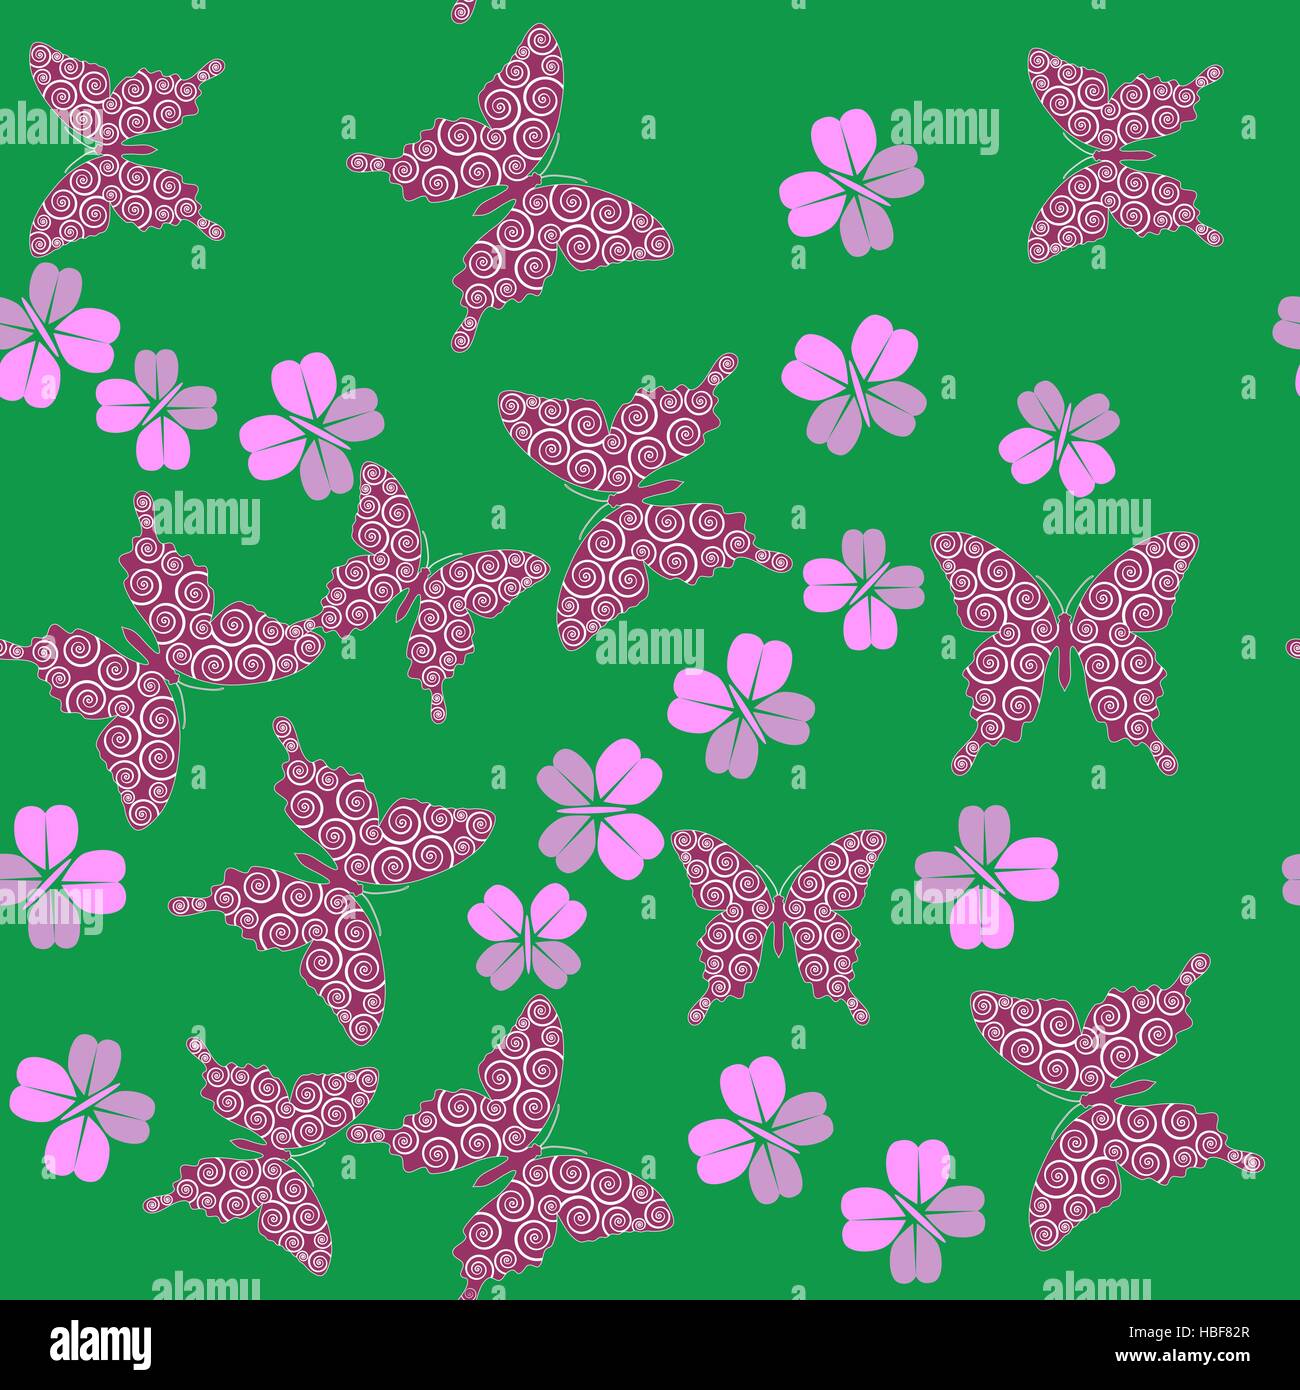 Butterfly and flower seamless texture 658 Stock Photo